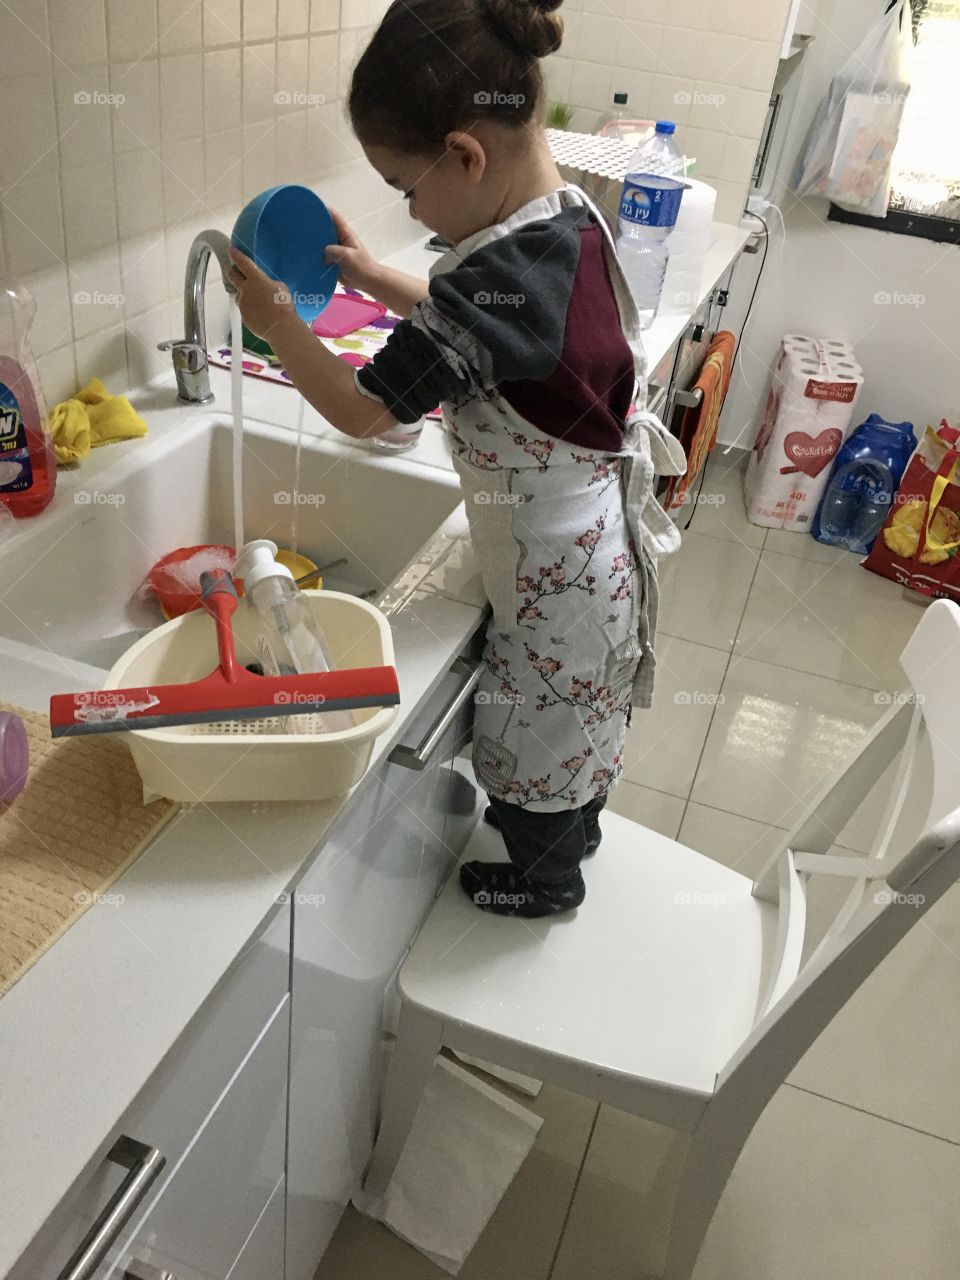 A girl uses a chair to help parents wash dishes